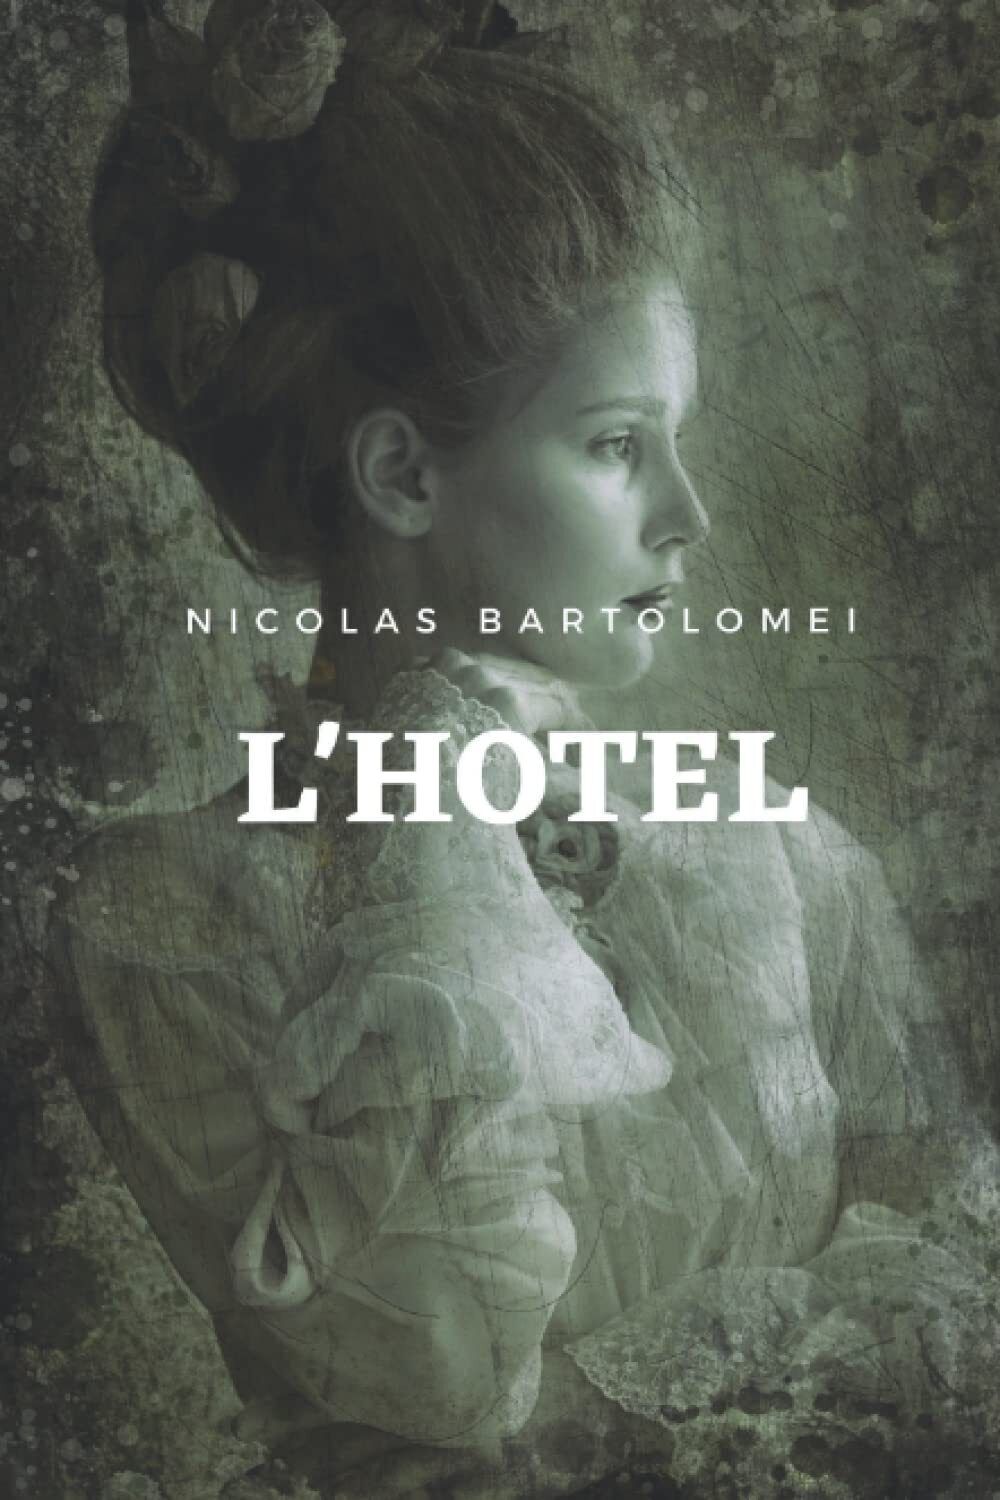 L'hotel - Nicolas Bartolomei - Independently Published, 2021